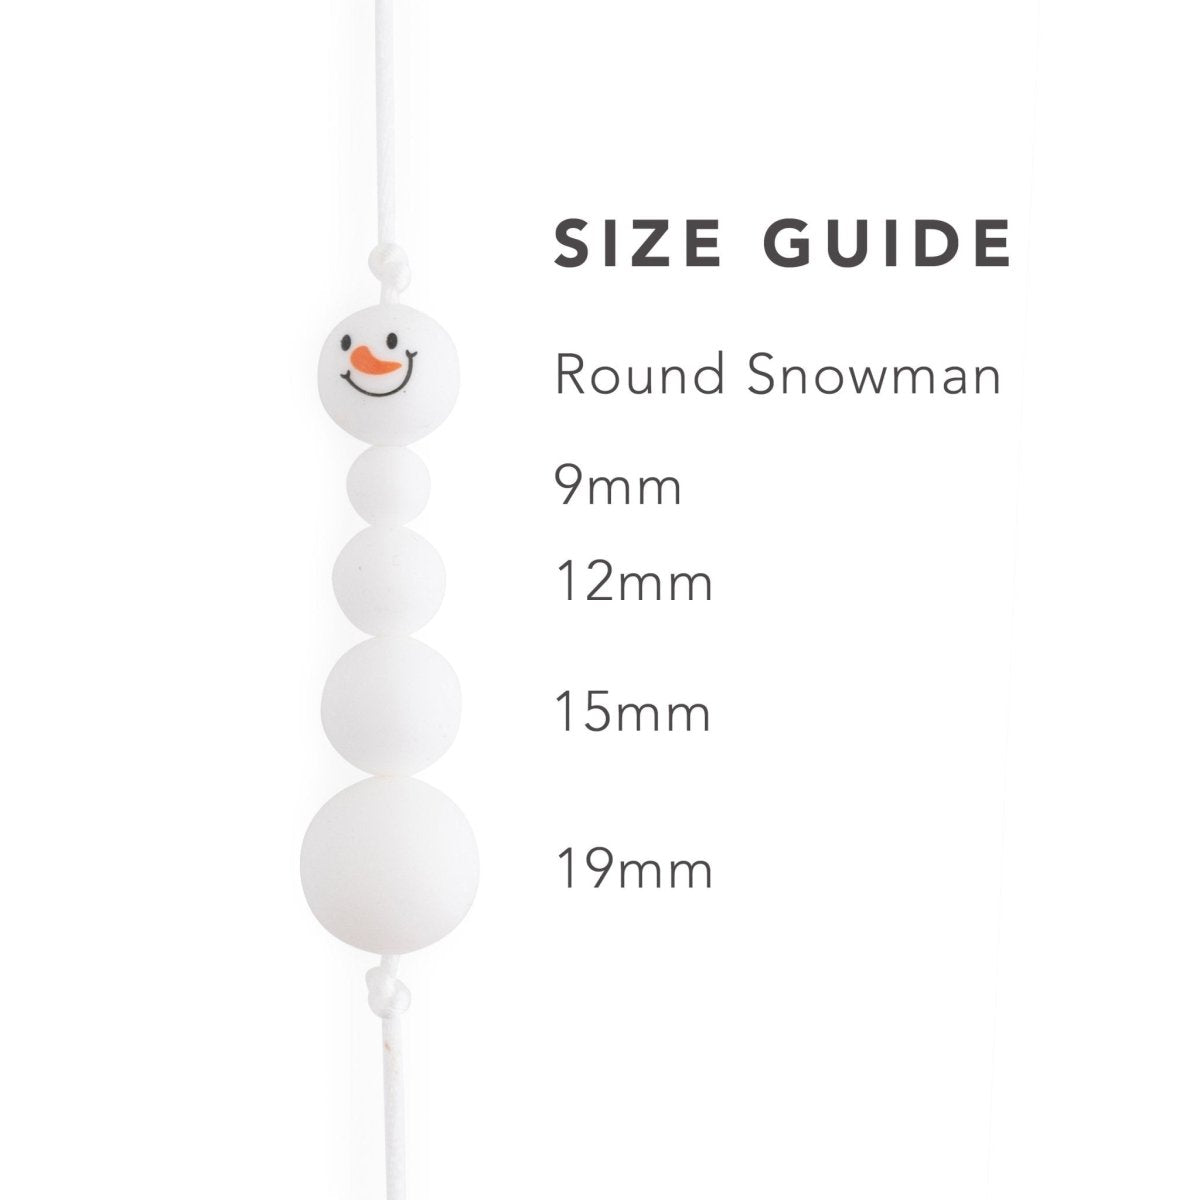 Silicone Focal Beads Round Snowman Snowman Body from Cara & Co Craft Supply